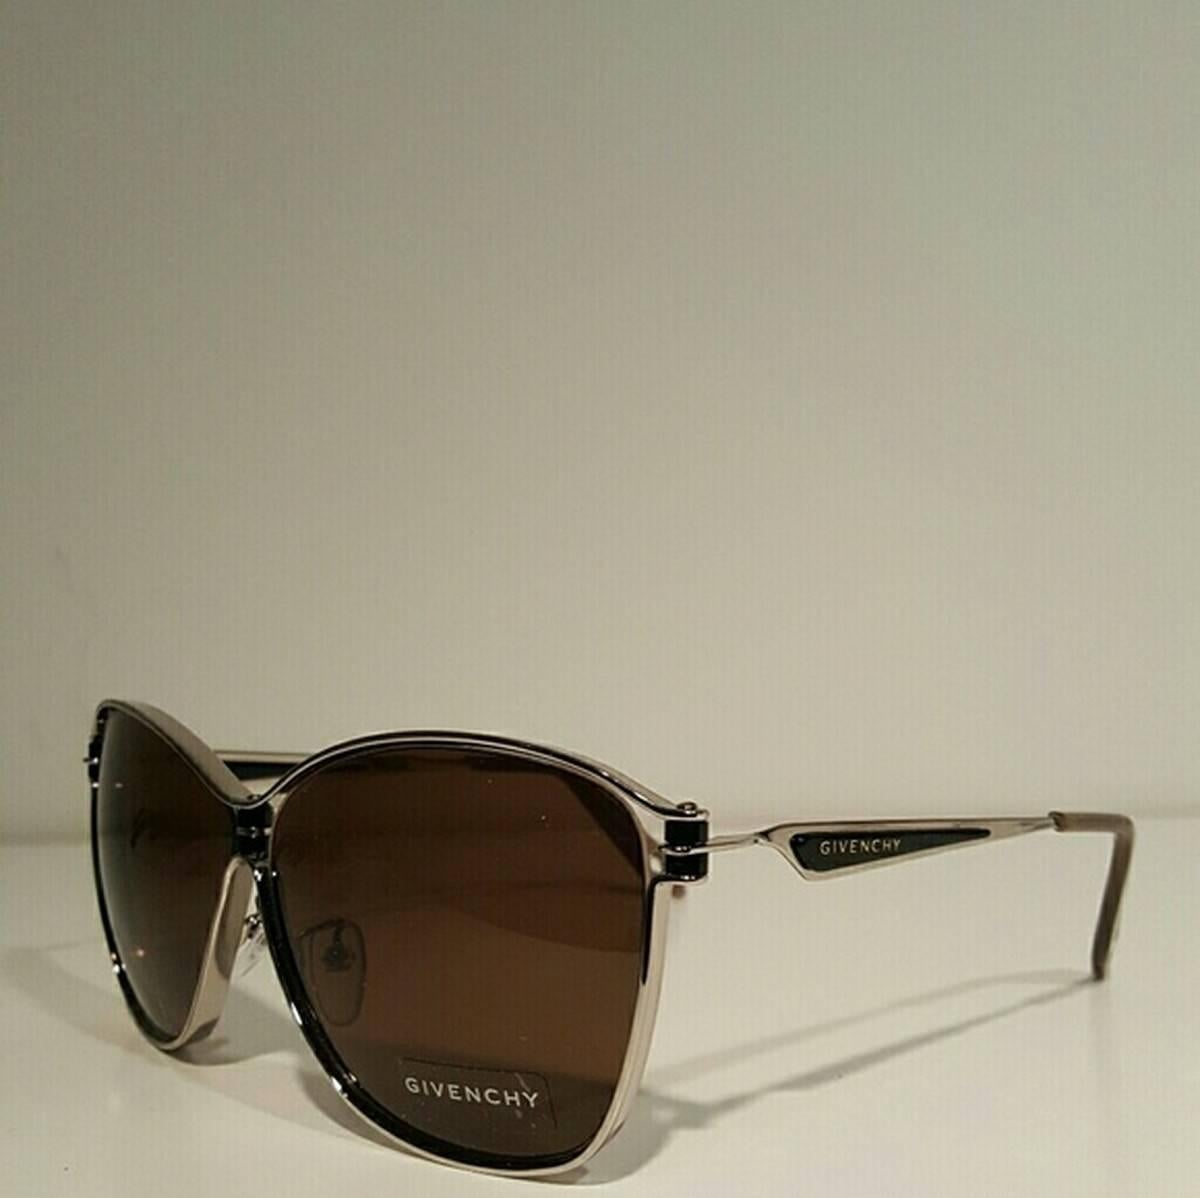 Givenchy Oval Sunglasses
Color: Black/Silver
Size: OS

Brand new with box.
Unused condition.
No flaws.
Made in Italy.